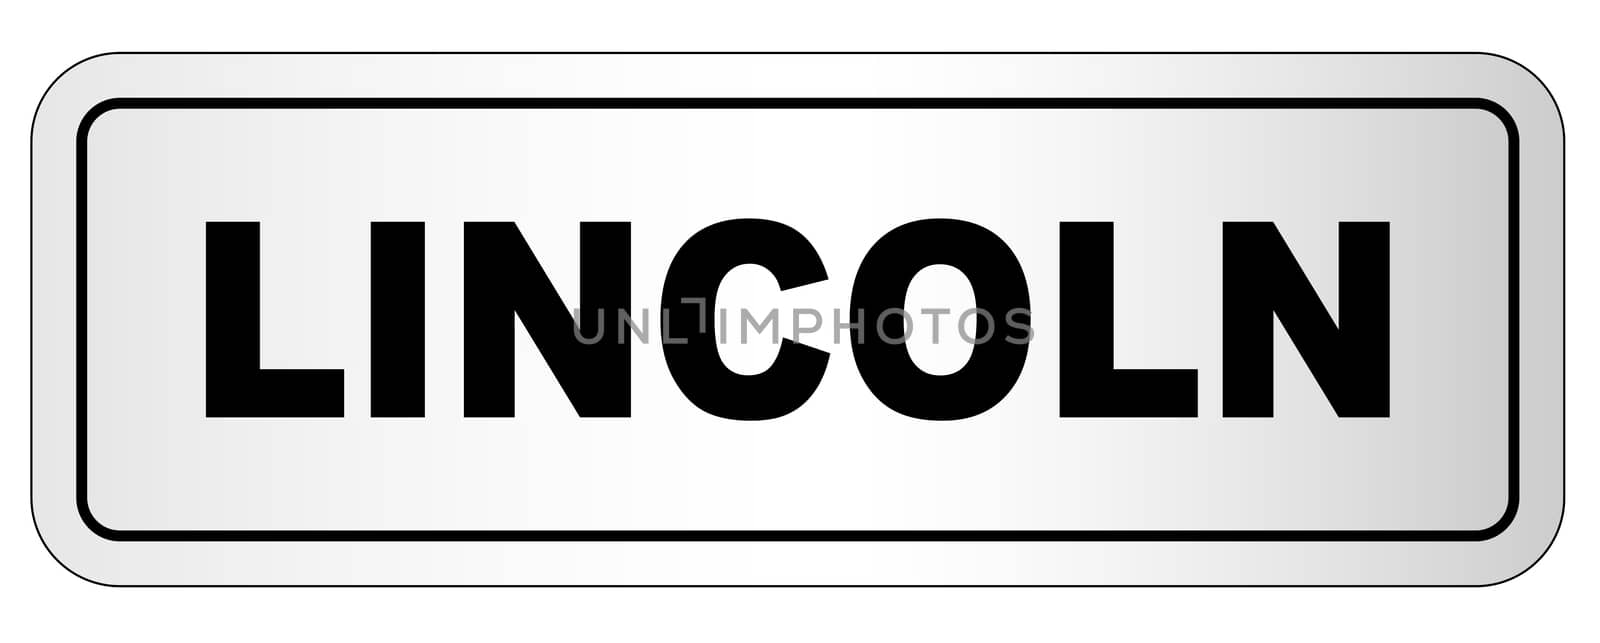 The city of Lincoln nameplate on a white background